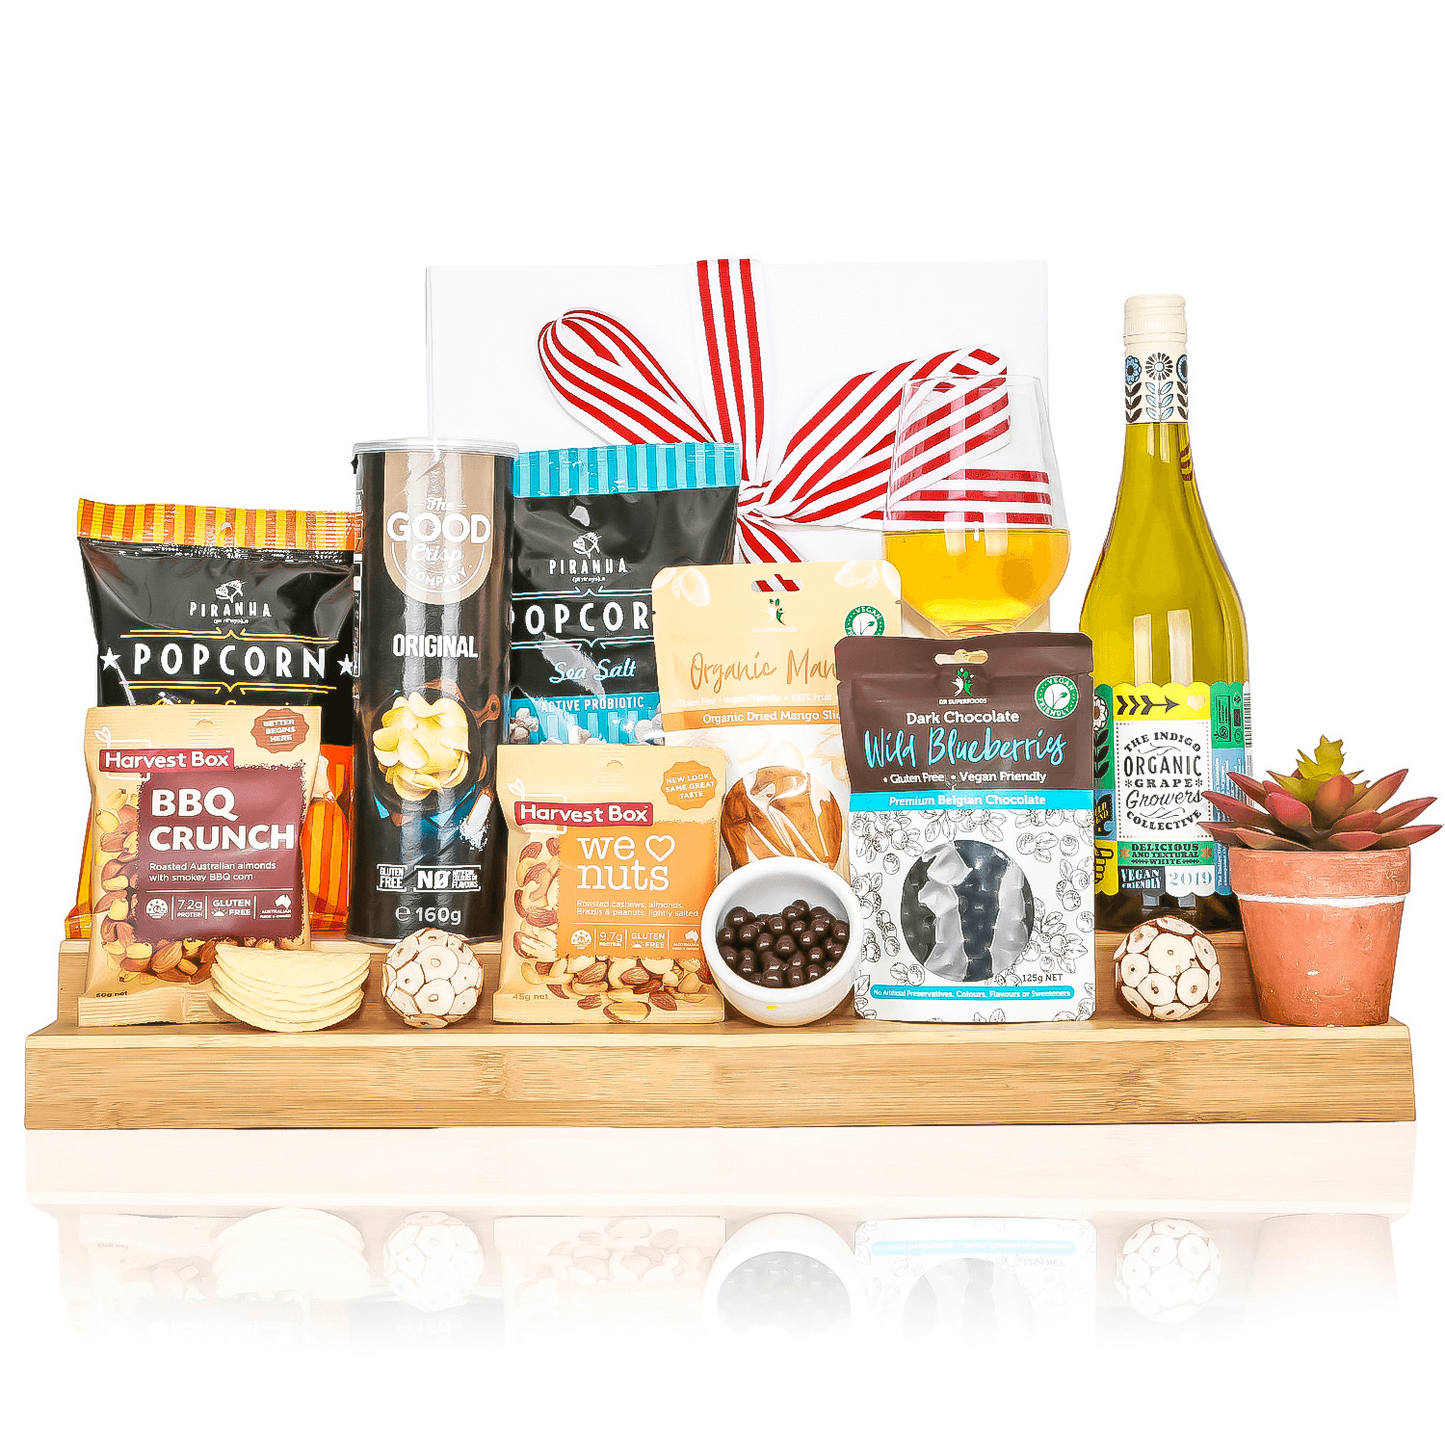 Organic Gift Basket - Healthy Belly Hampers - pure indulgence - birthday hampers - gift hampers - gift hampers melbourne - gift hampers australia - organic hampers -vegan hampers - gluten free hampers - birthday hampers -anniversary hampers - wedding hampers - alcohol hampers